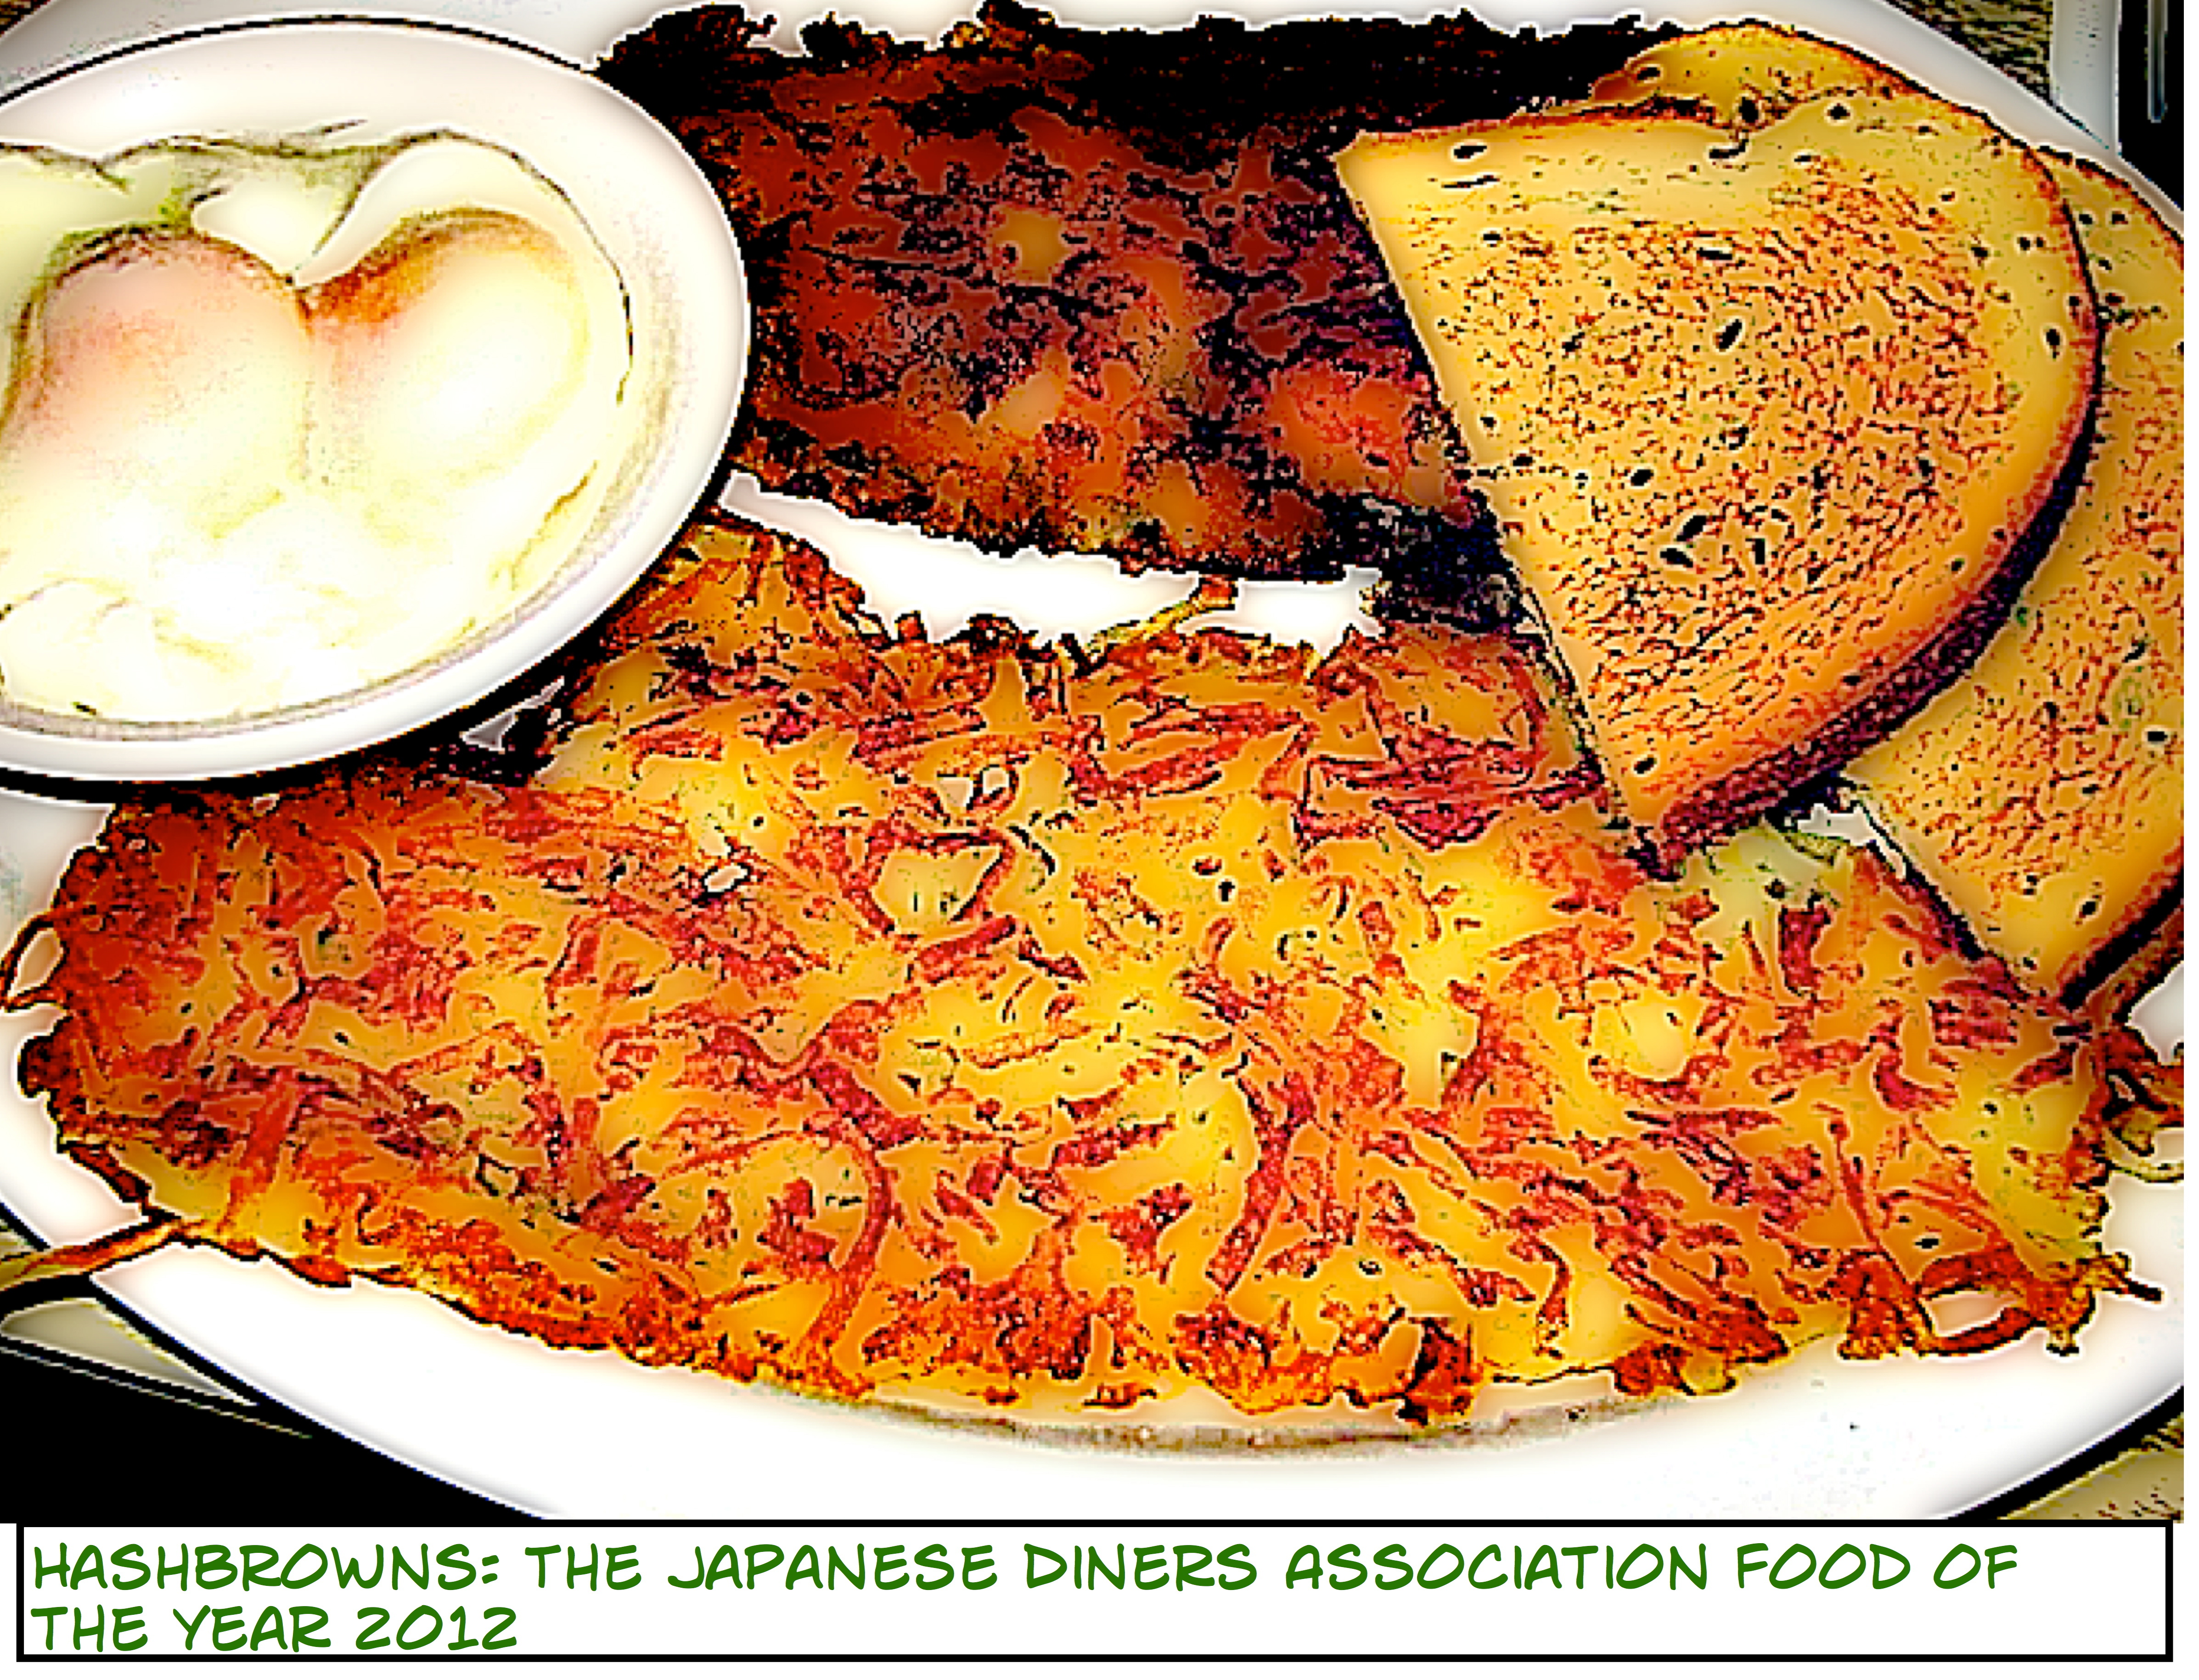 “Hashbrowns” are the 2012 Food of the Year says Japanese Diners Association